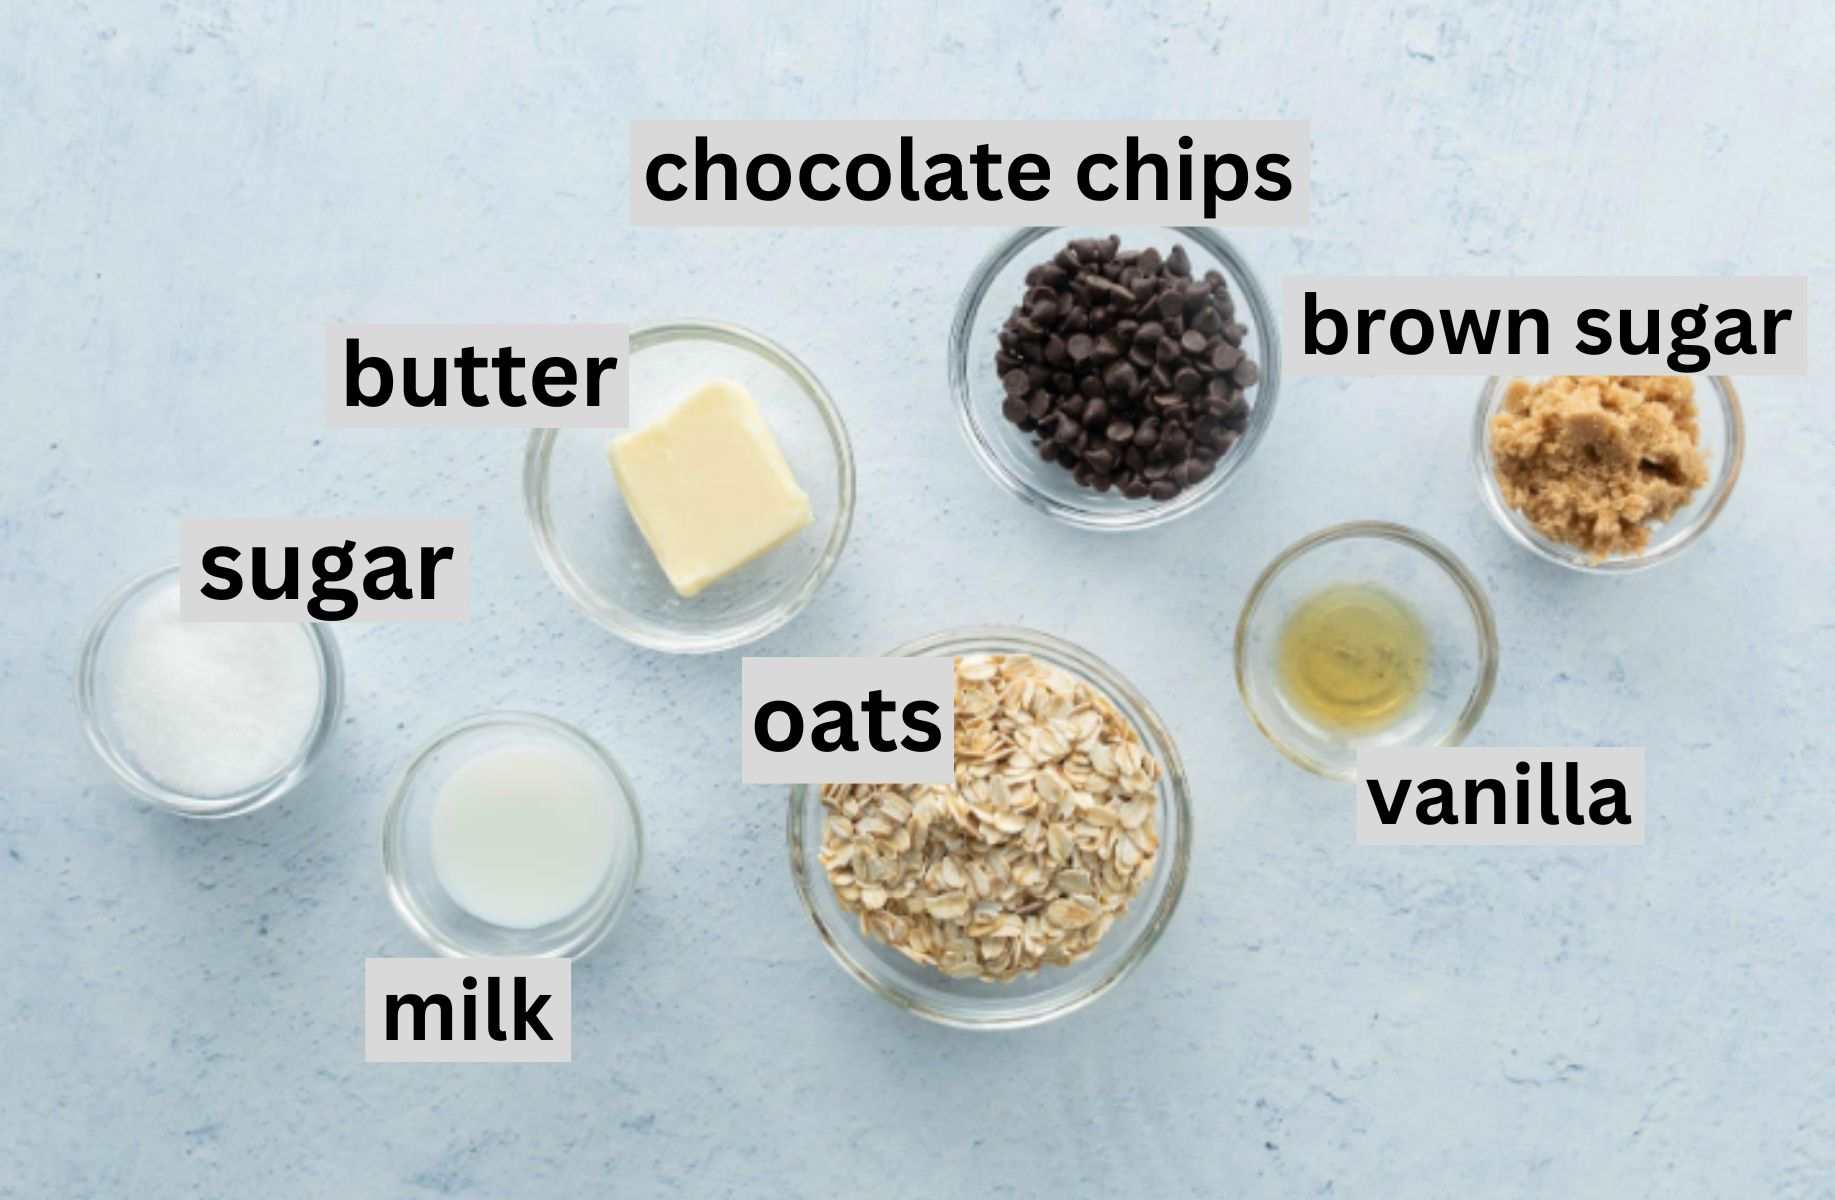 sugars, butter, oats, chocolate chips on table